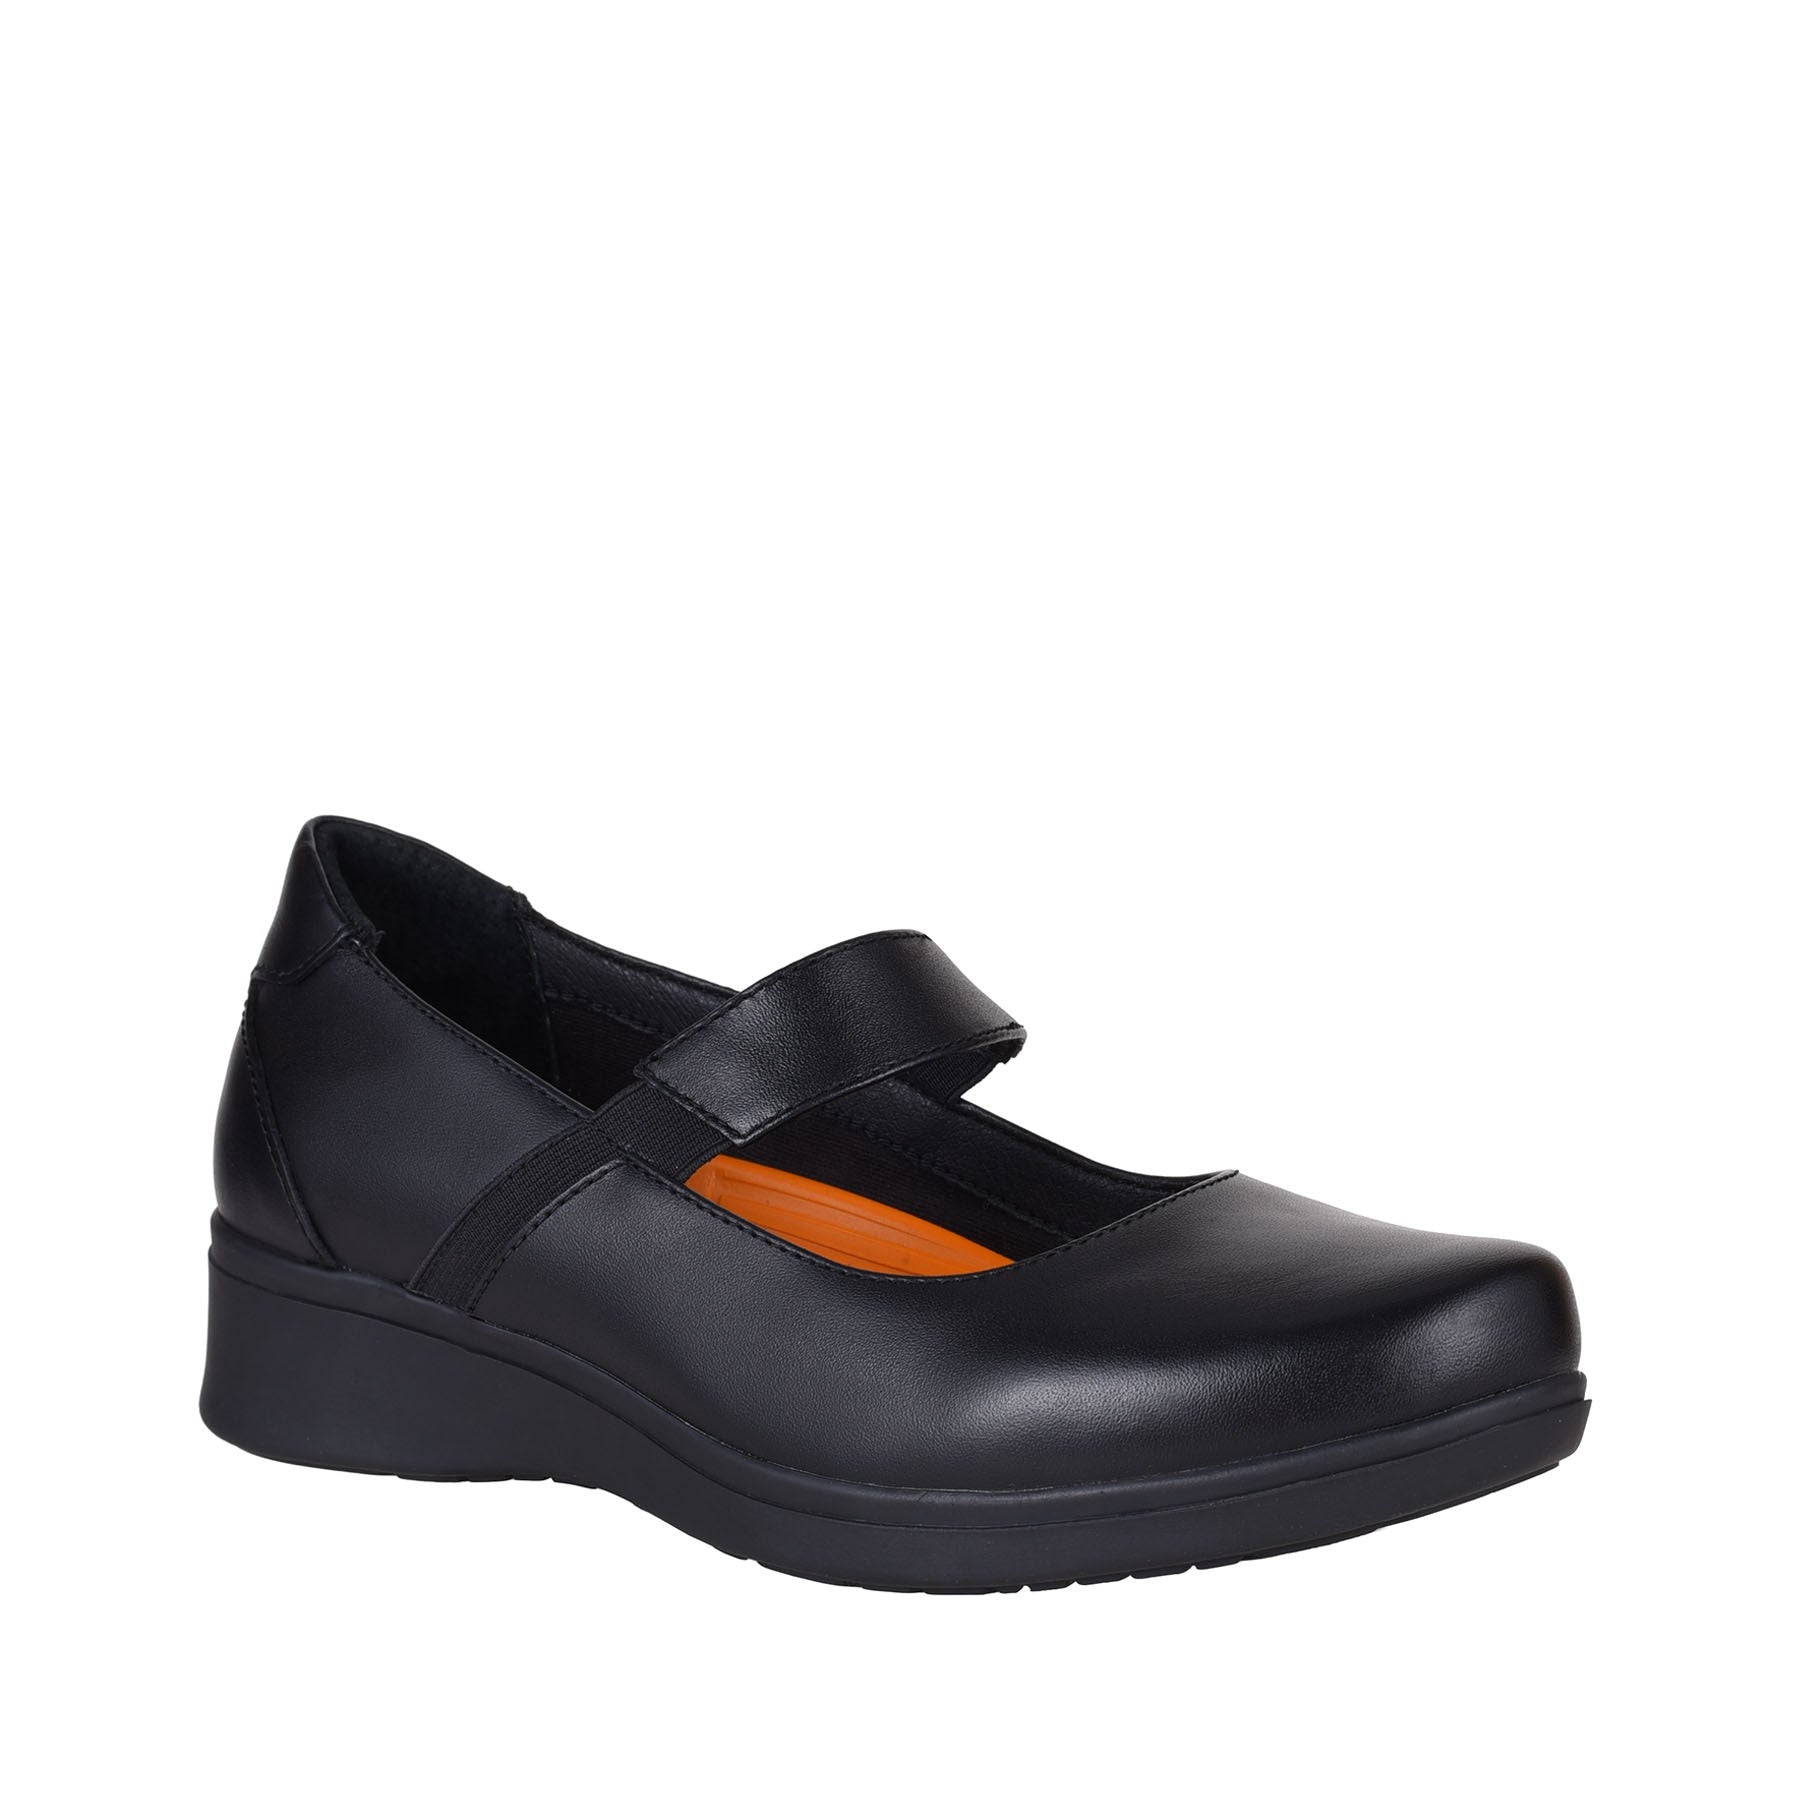 HP-Y1 (The one bar black) 22197389 HUSH PUPPIES